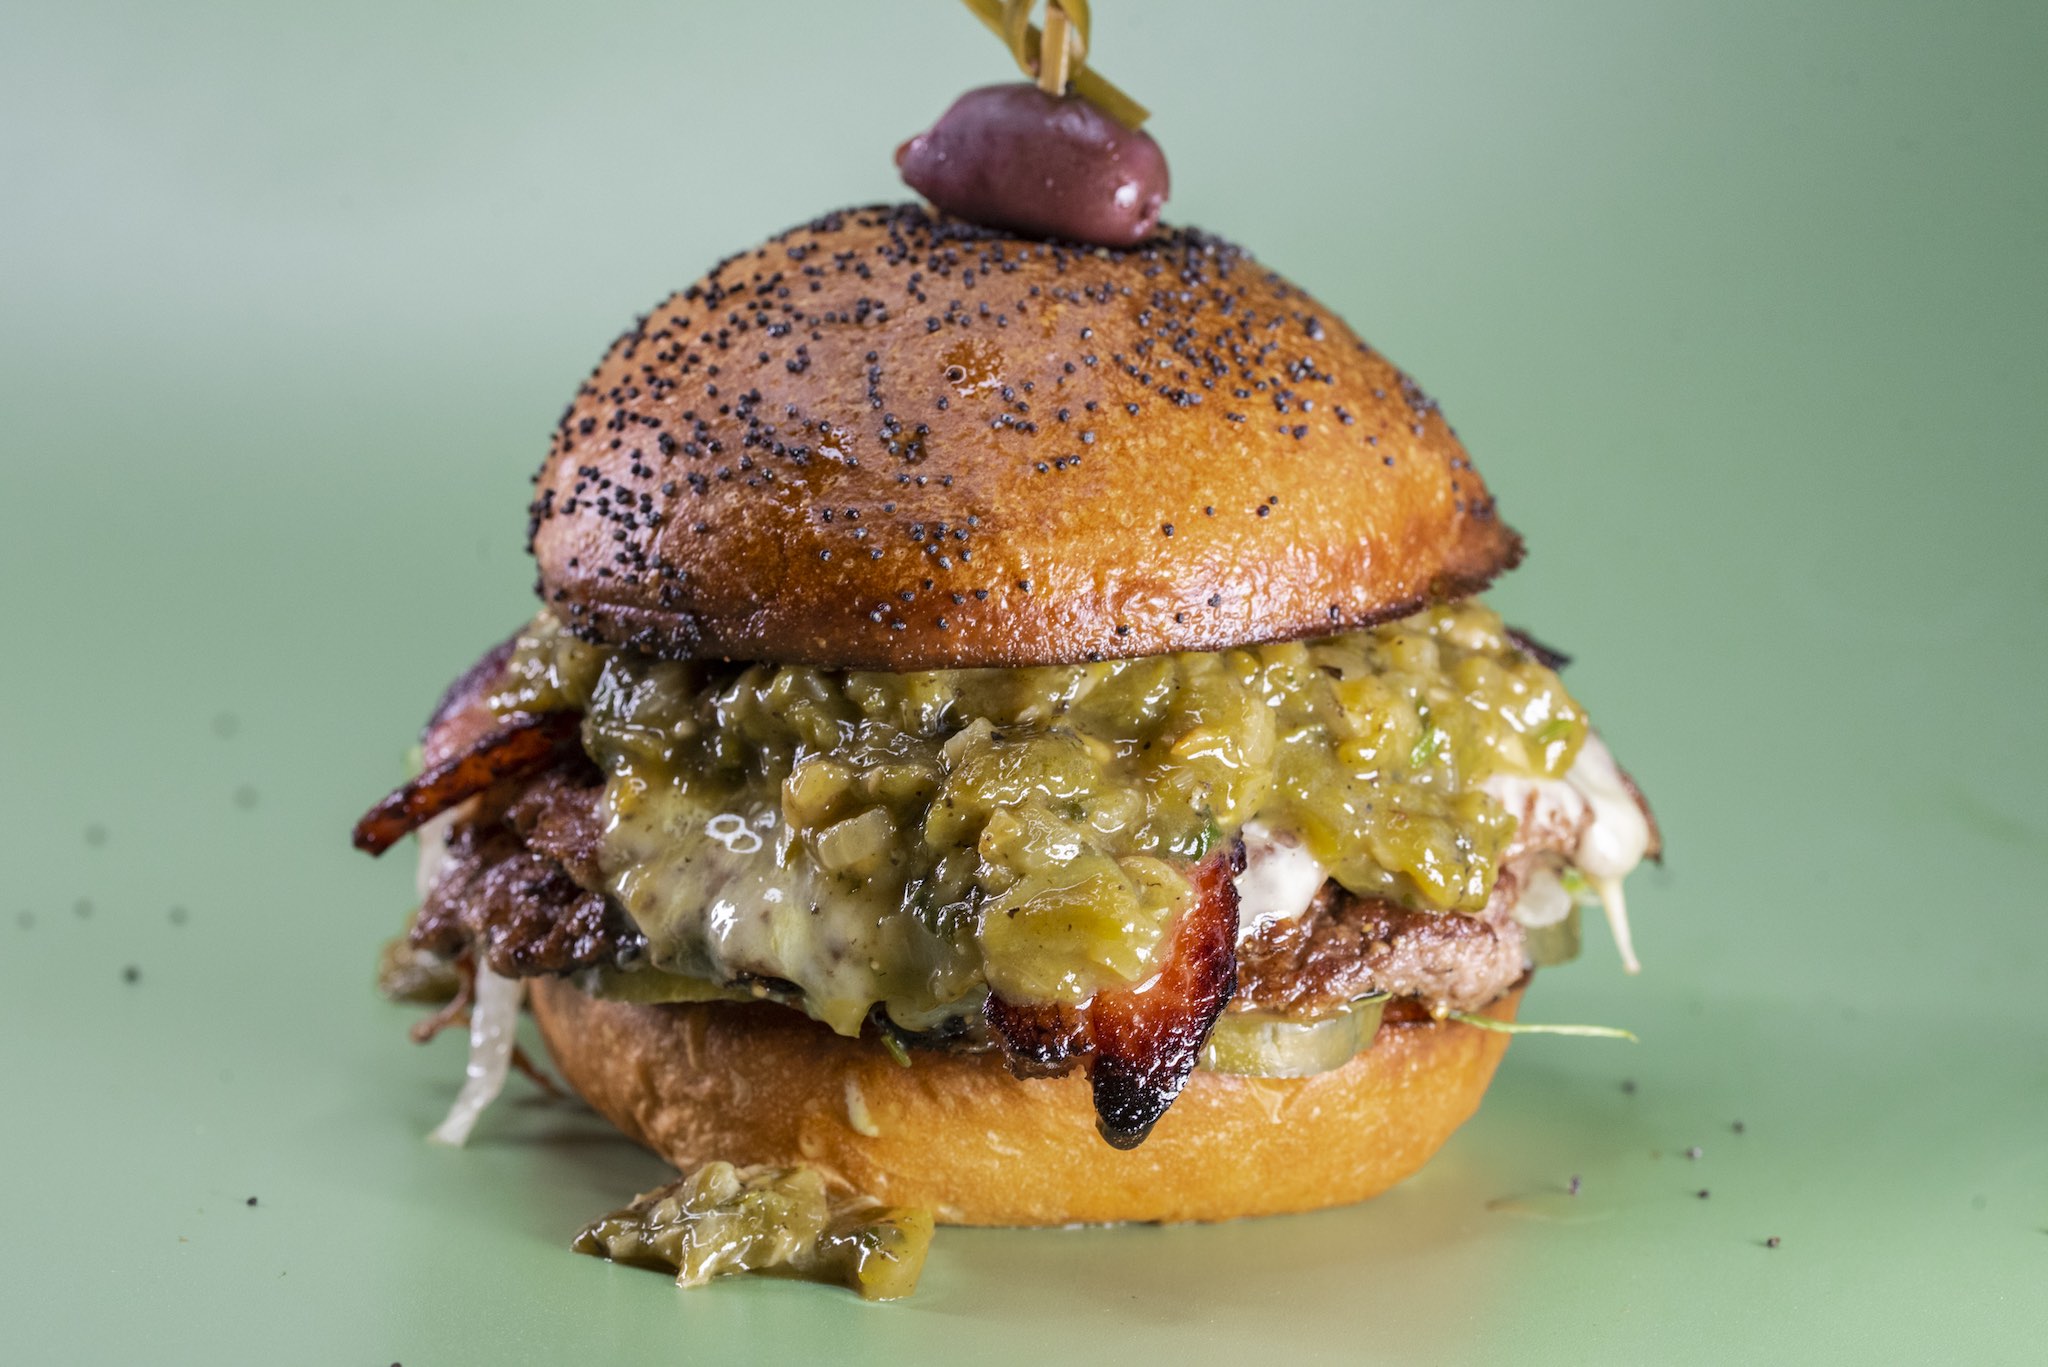 Closeup of a burger on a toasted brioche bun speckled with poppy seeds, layered with melty cheese, thick bacon, sliced pickles, and dripping with green salsa. A kalamata olive is speared on top.